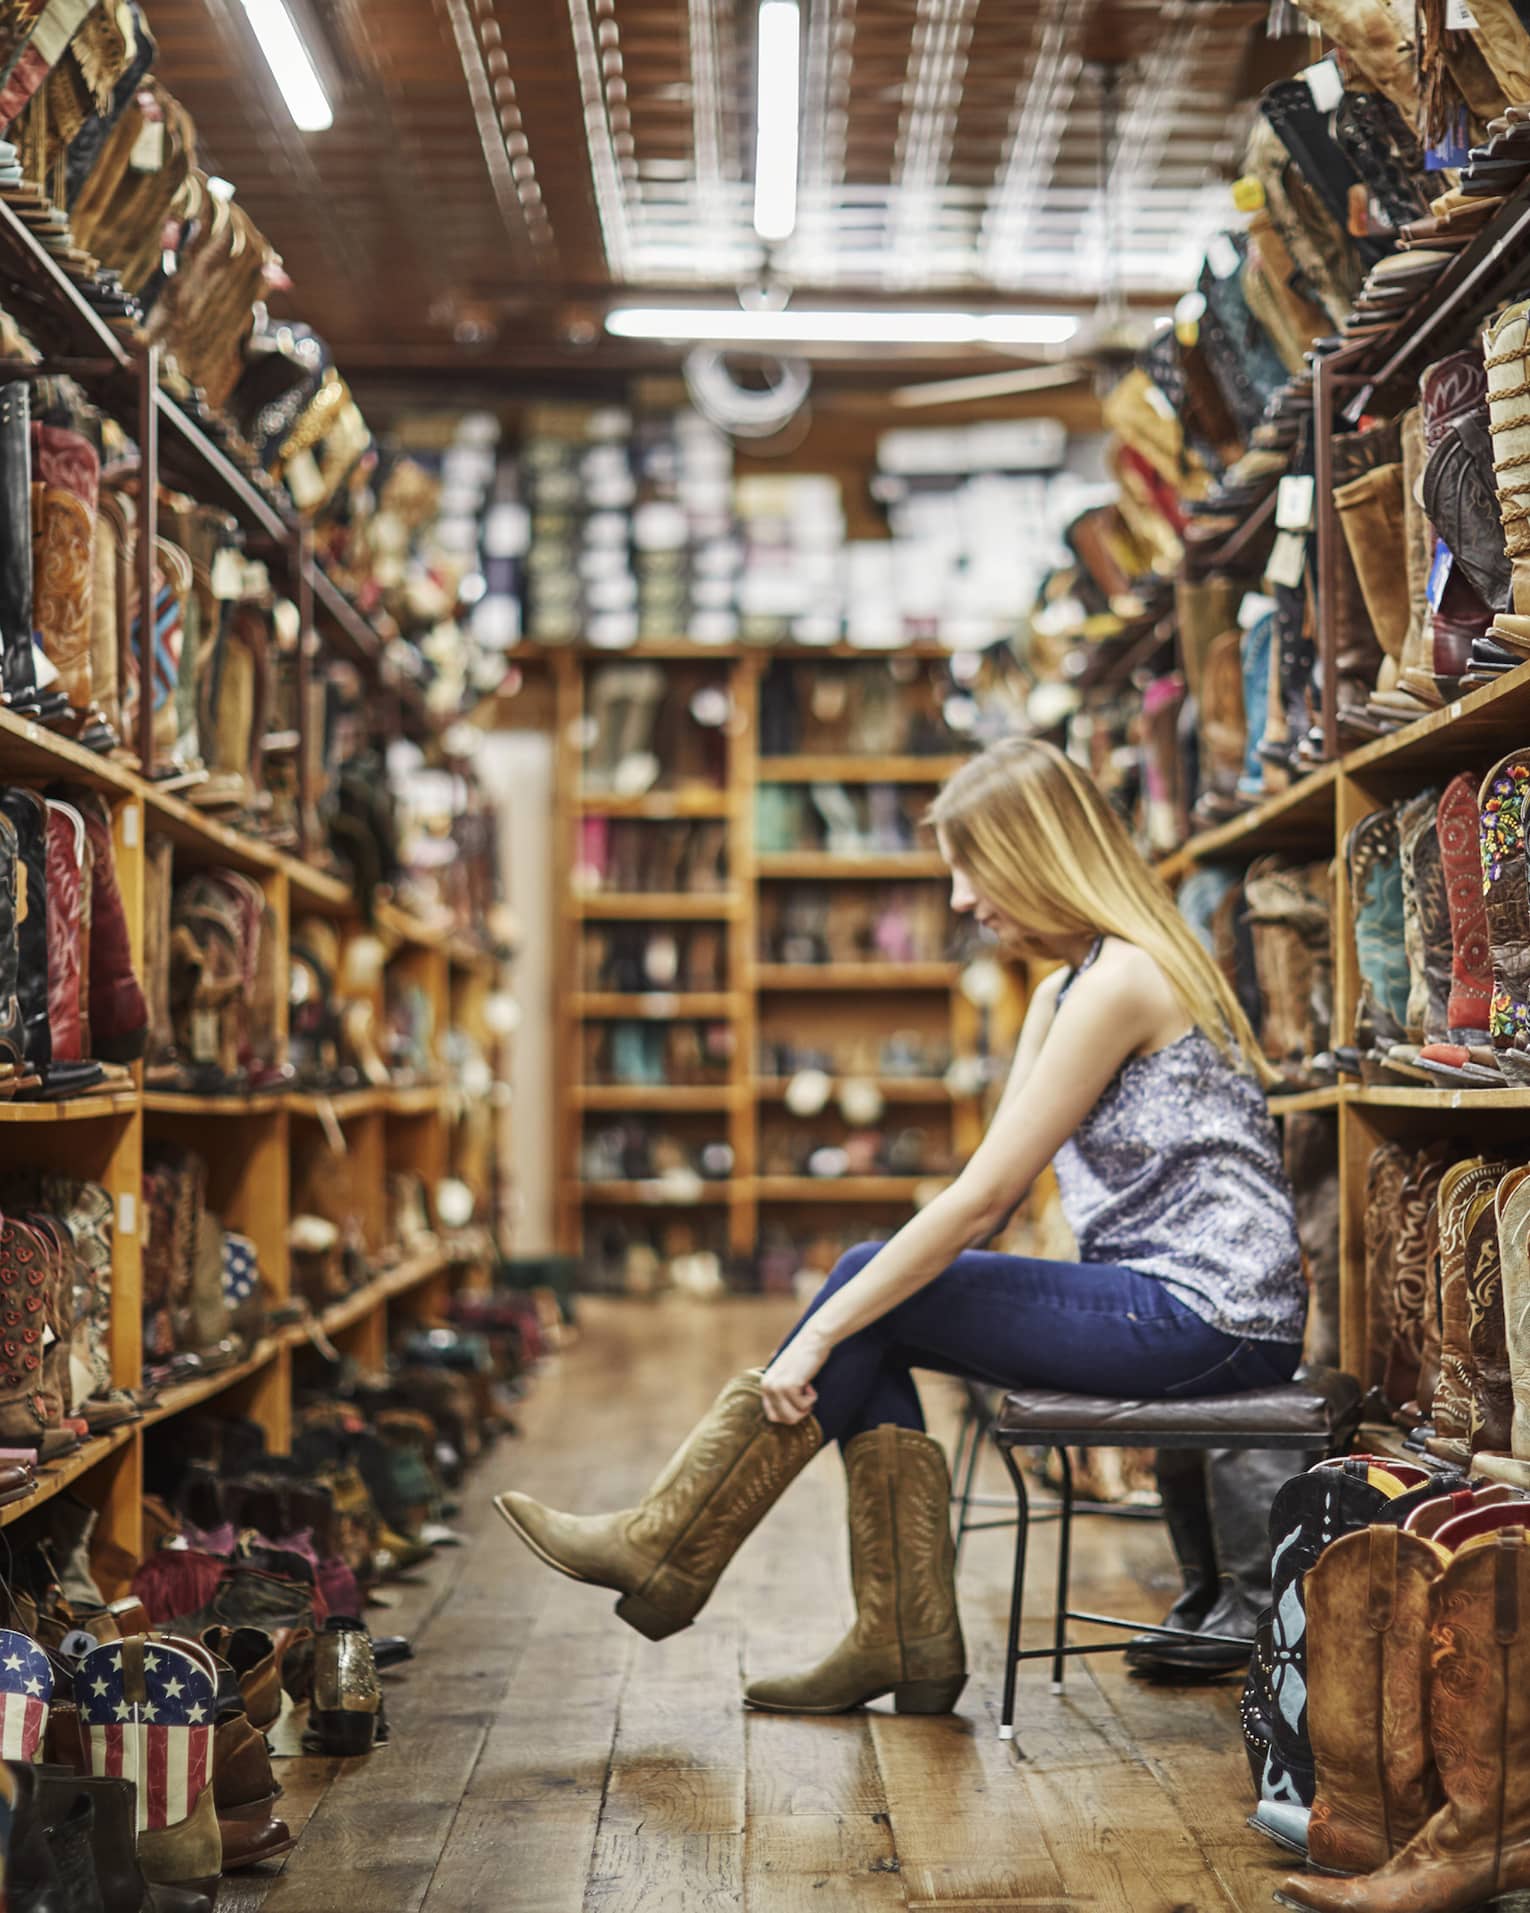 A woman trying on cowboy boots in a store full of them.